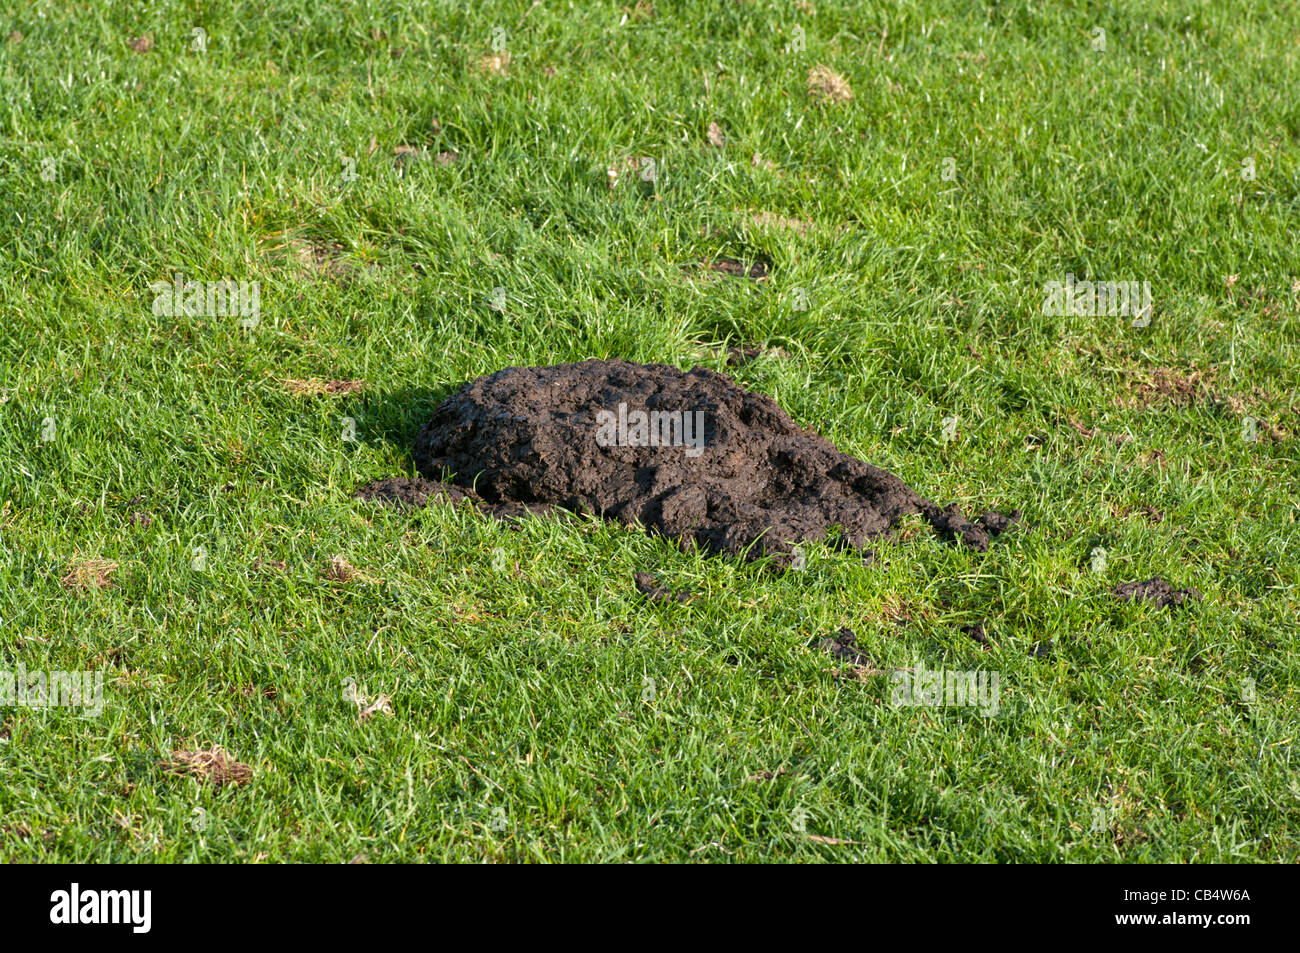 Pile Of Cow Manure On Grass Stock Photo 41289538 Alamy